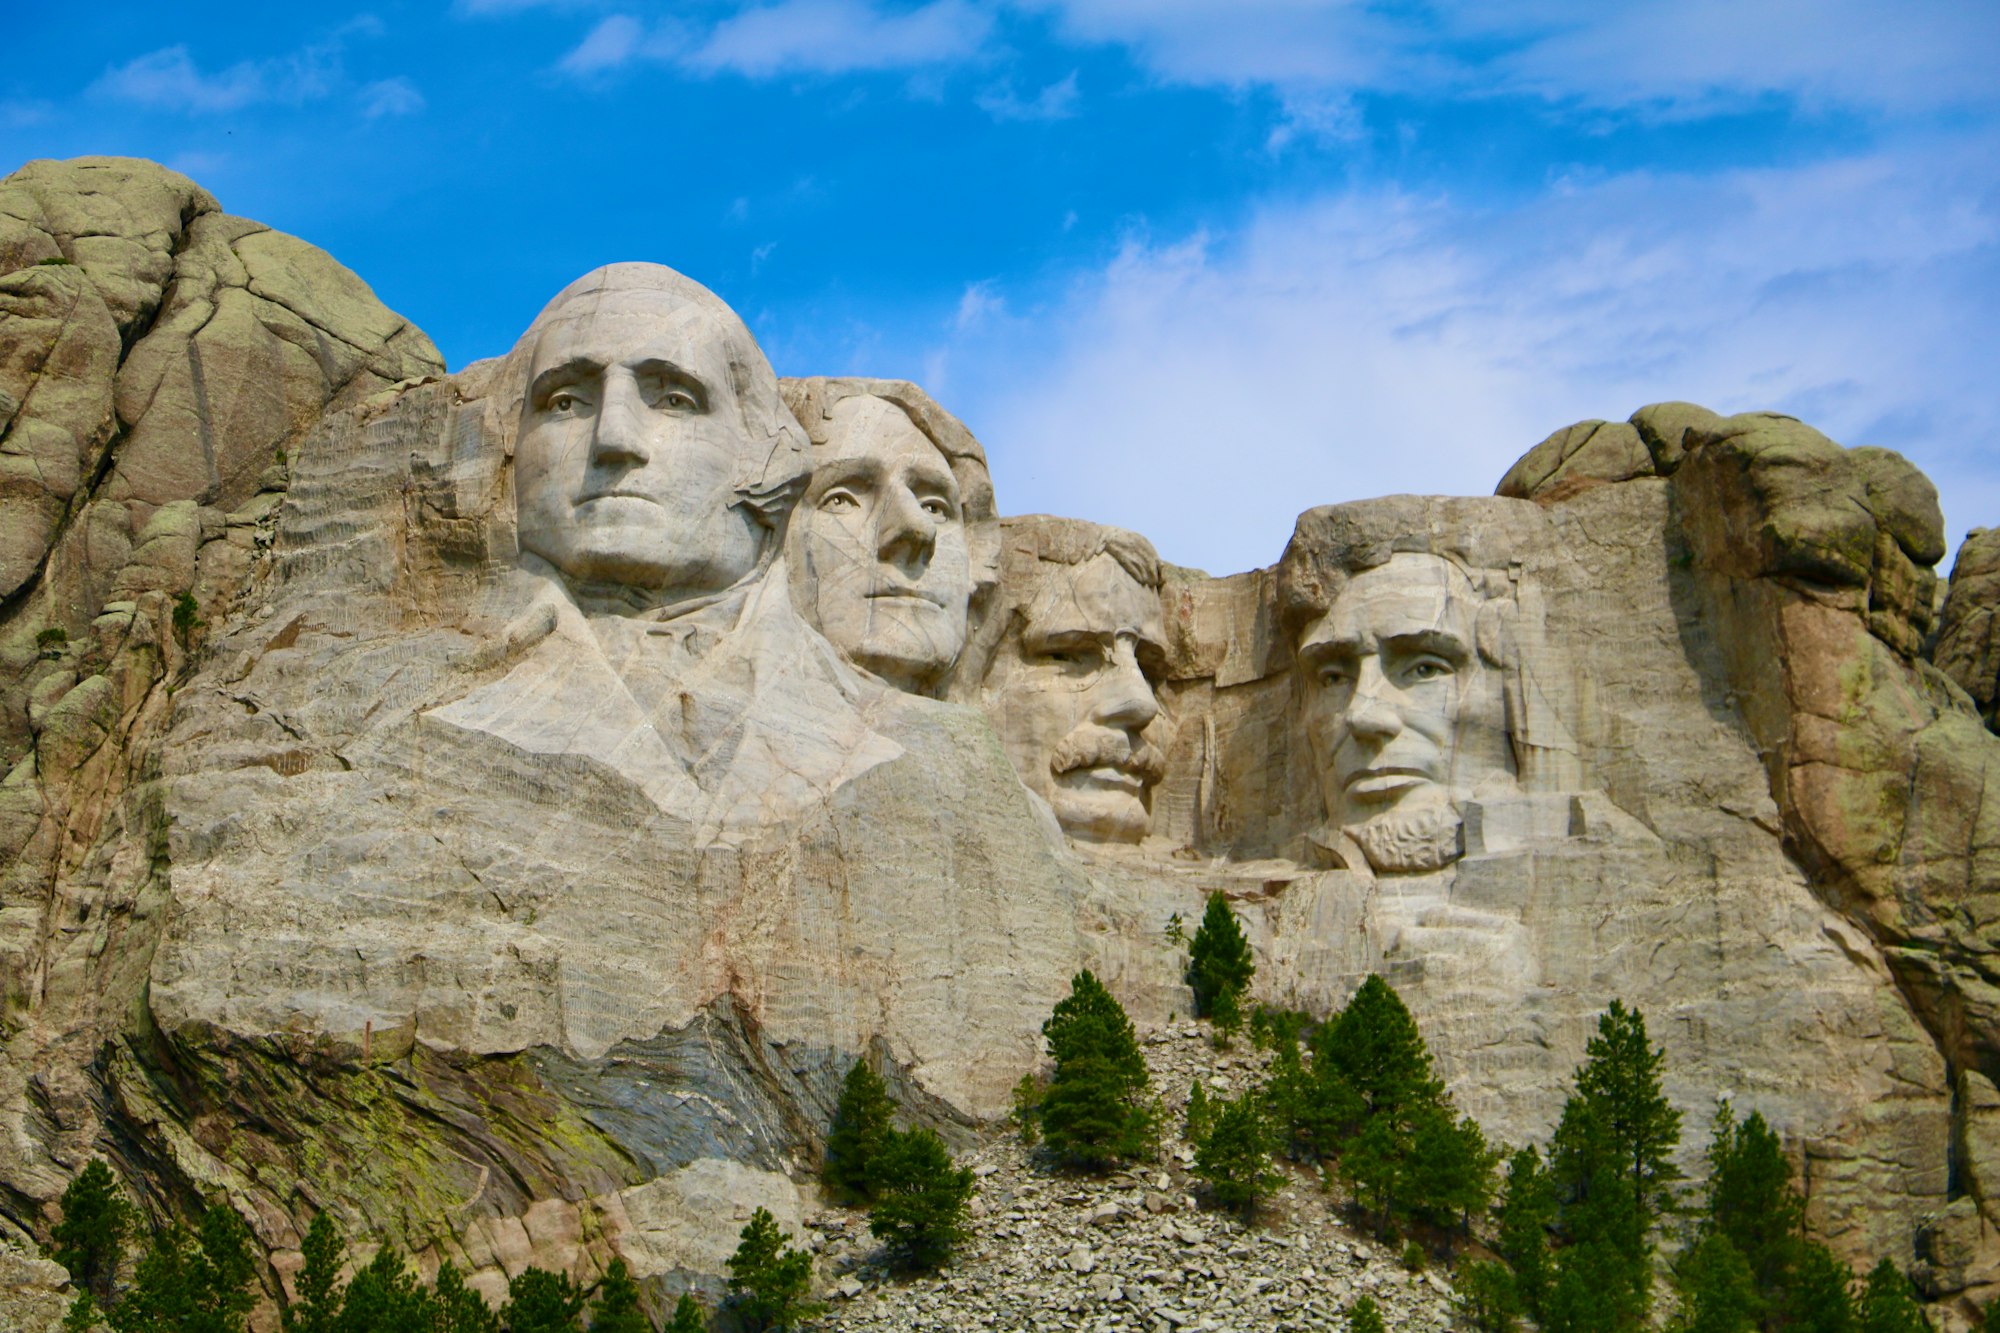 Where Is Mount Rushmore Located?